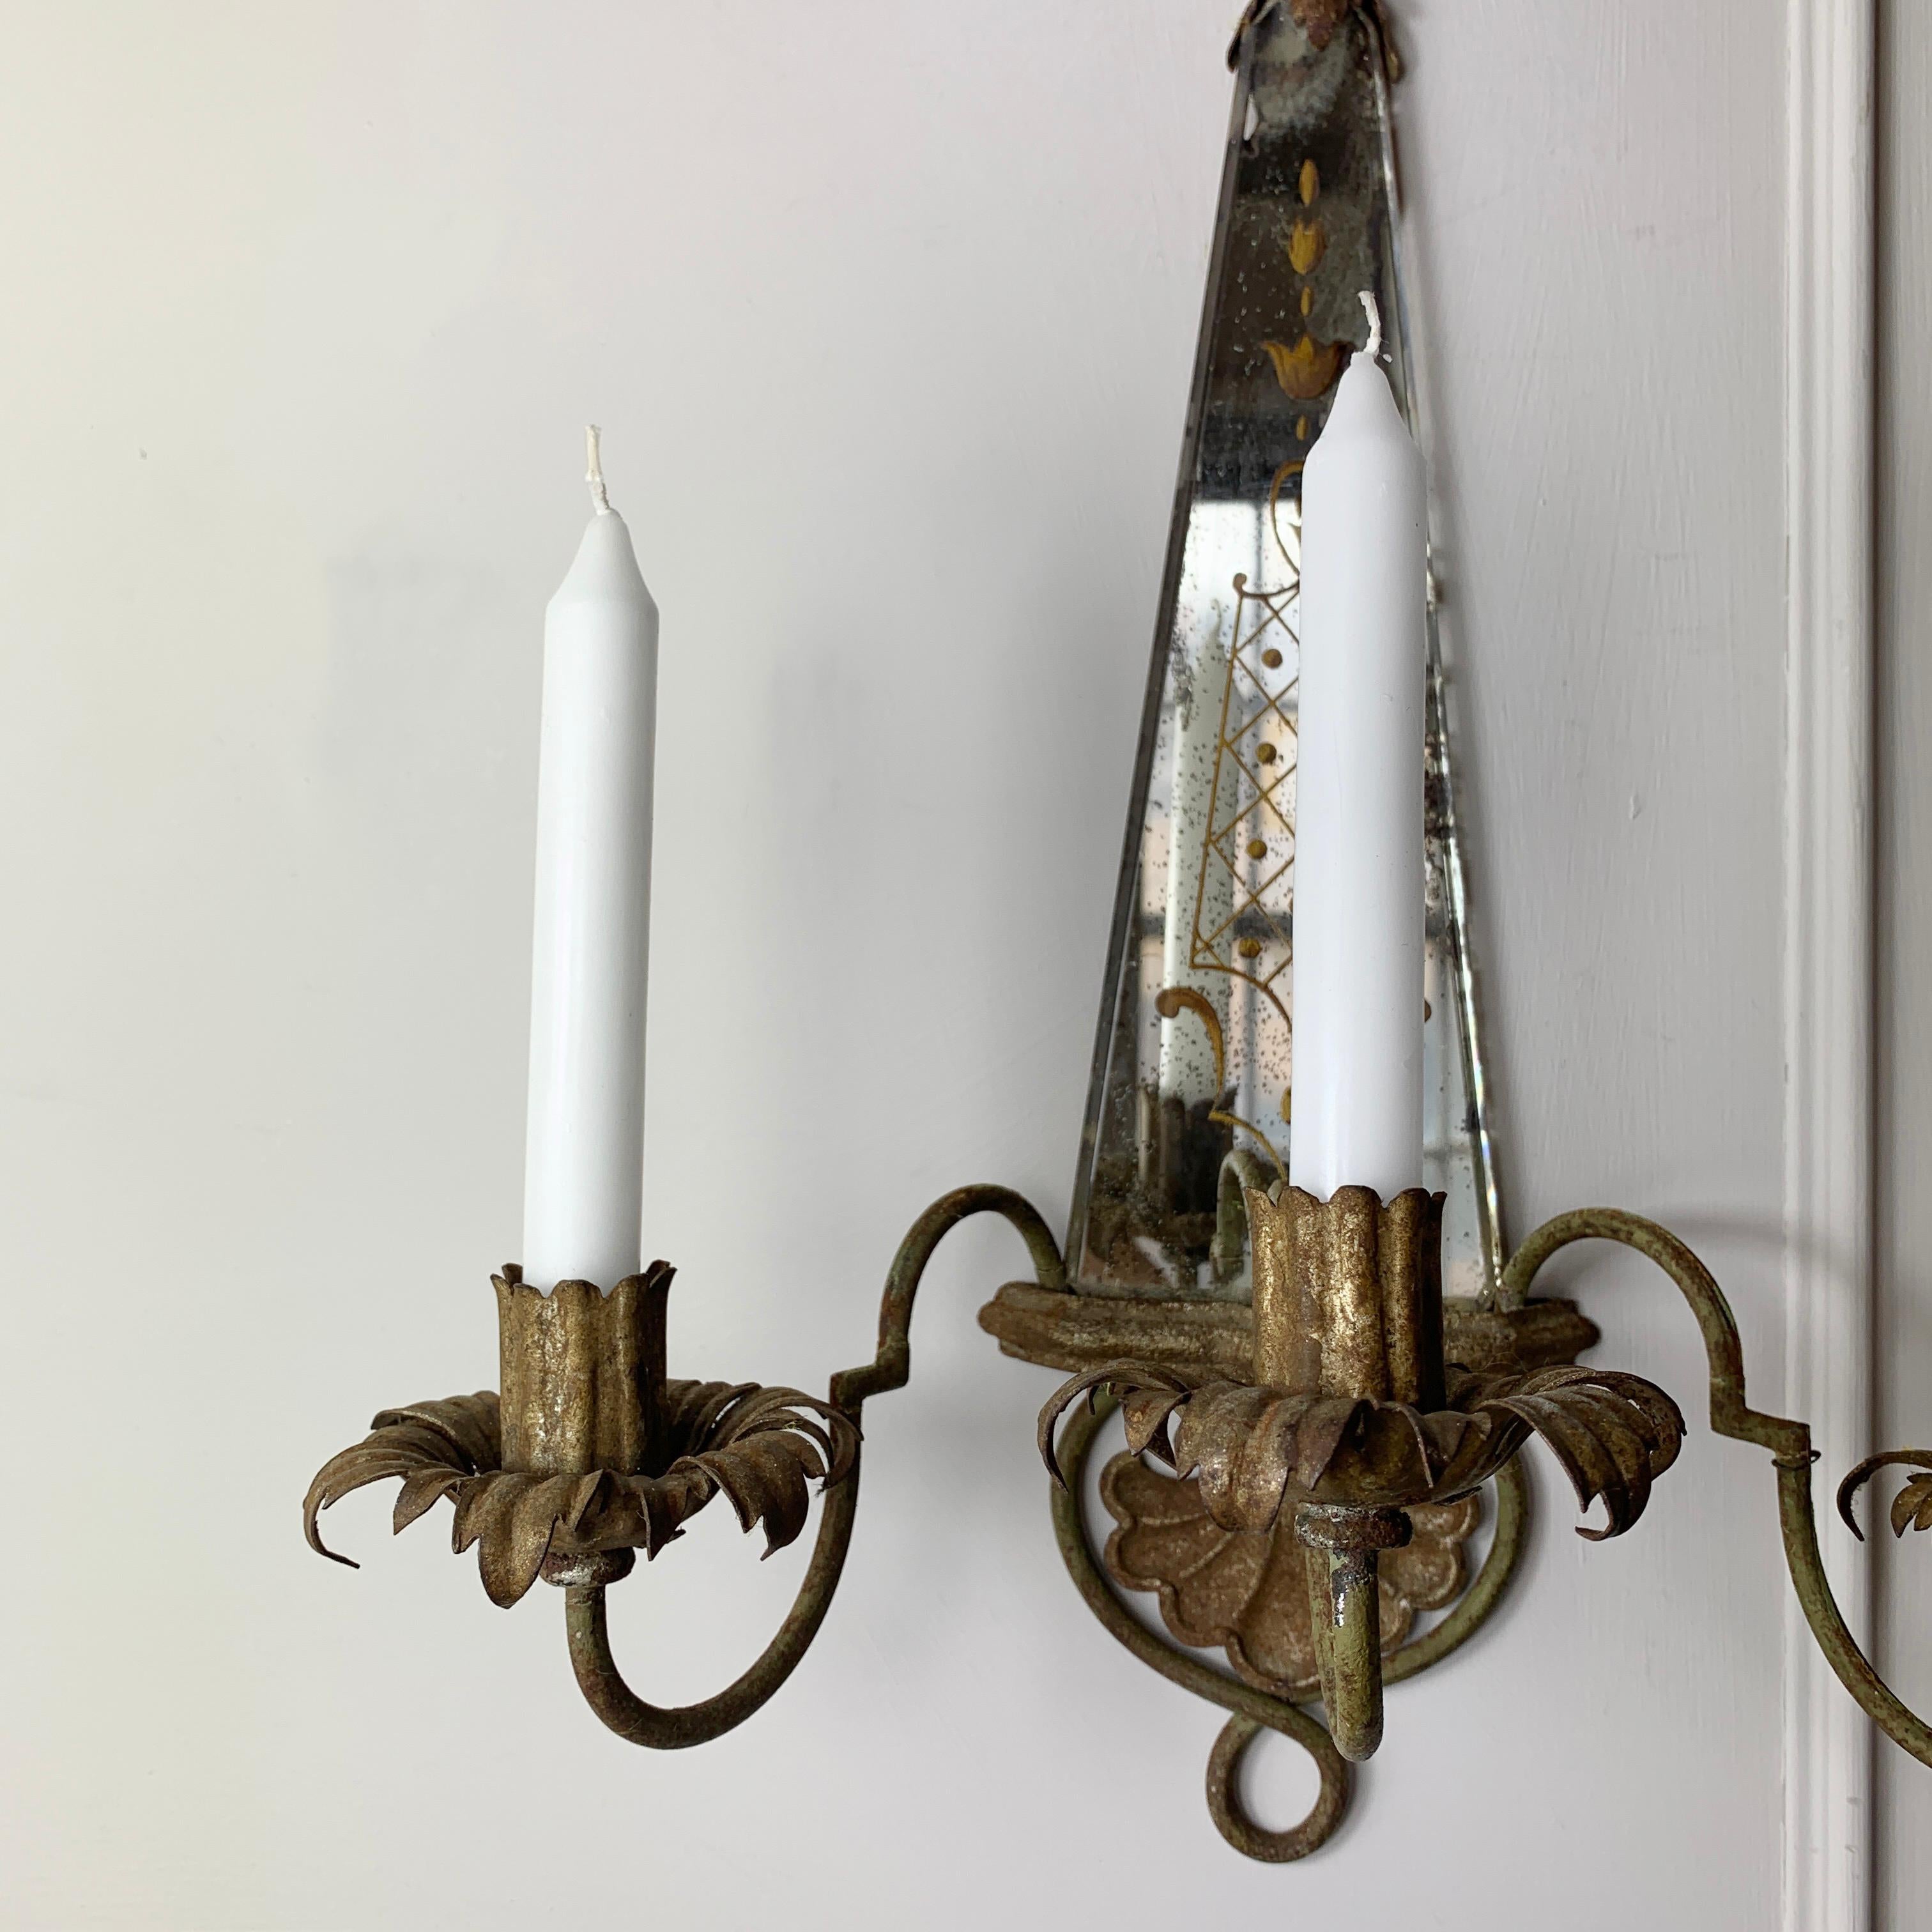 Metal Early 20th Century French Mirrored Candle Sconce